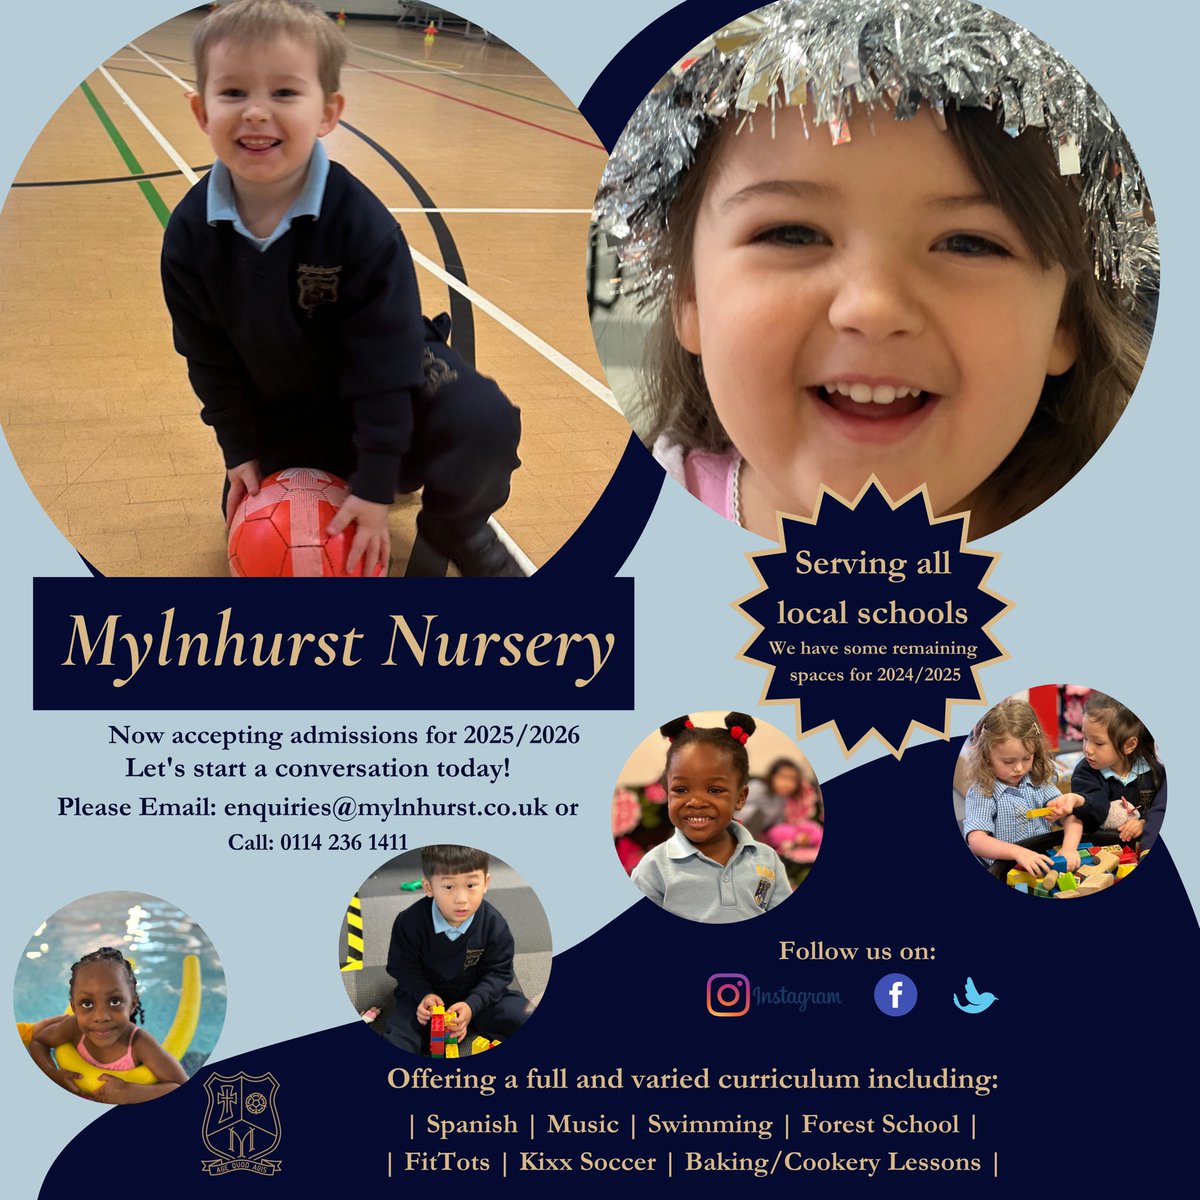 ‼️We have a few remaining spaces for the 2024/2025 academic year‼️ If you would like to take a tour of our wonderful setting please give us a call 01142361411 
#sheffieldissuper #sheffield #preschool #earlyyears #S11 #earlyyearseducation #childhood #children #toddlers #school